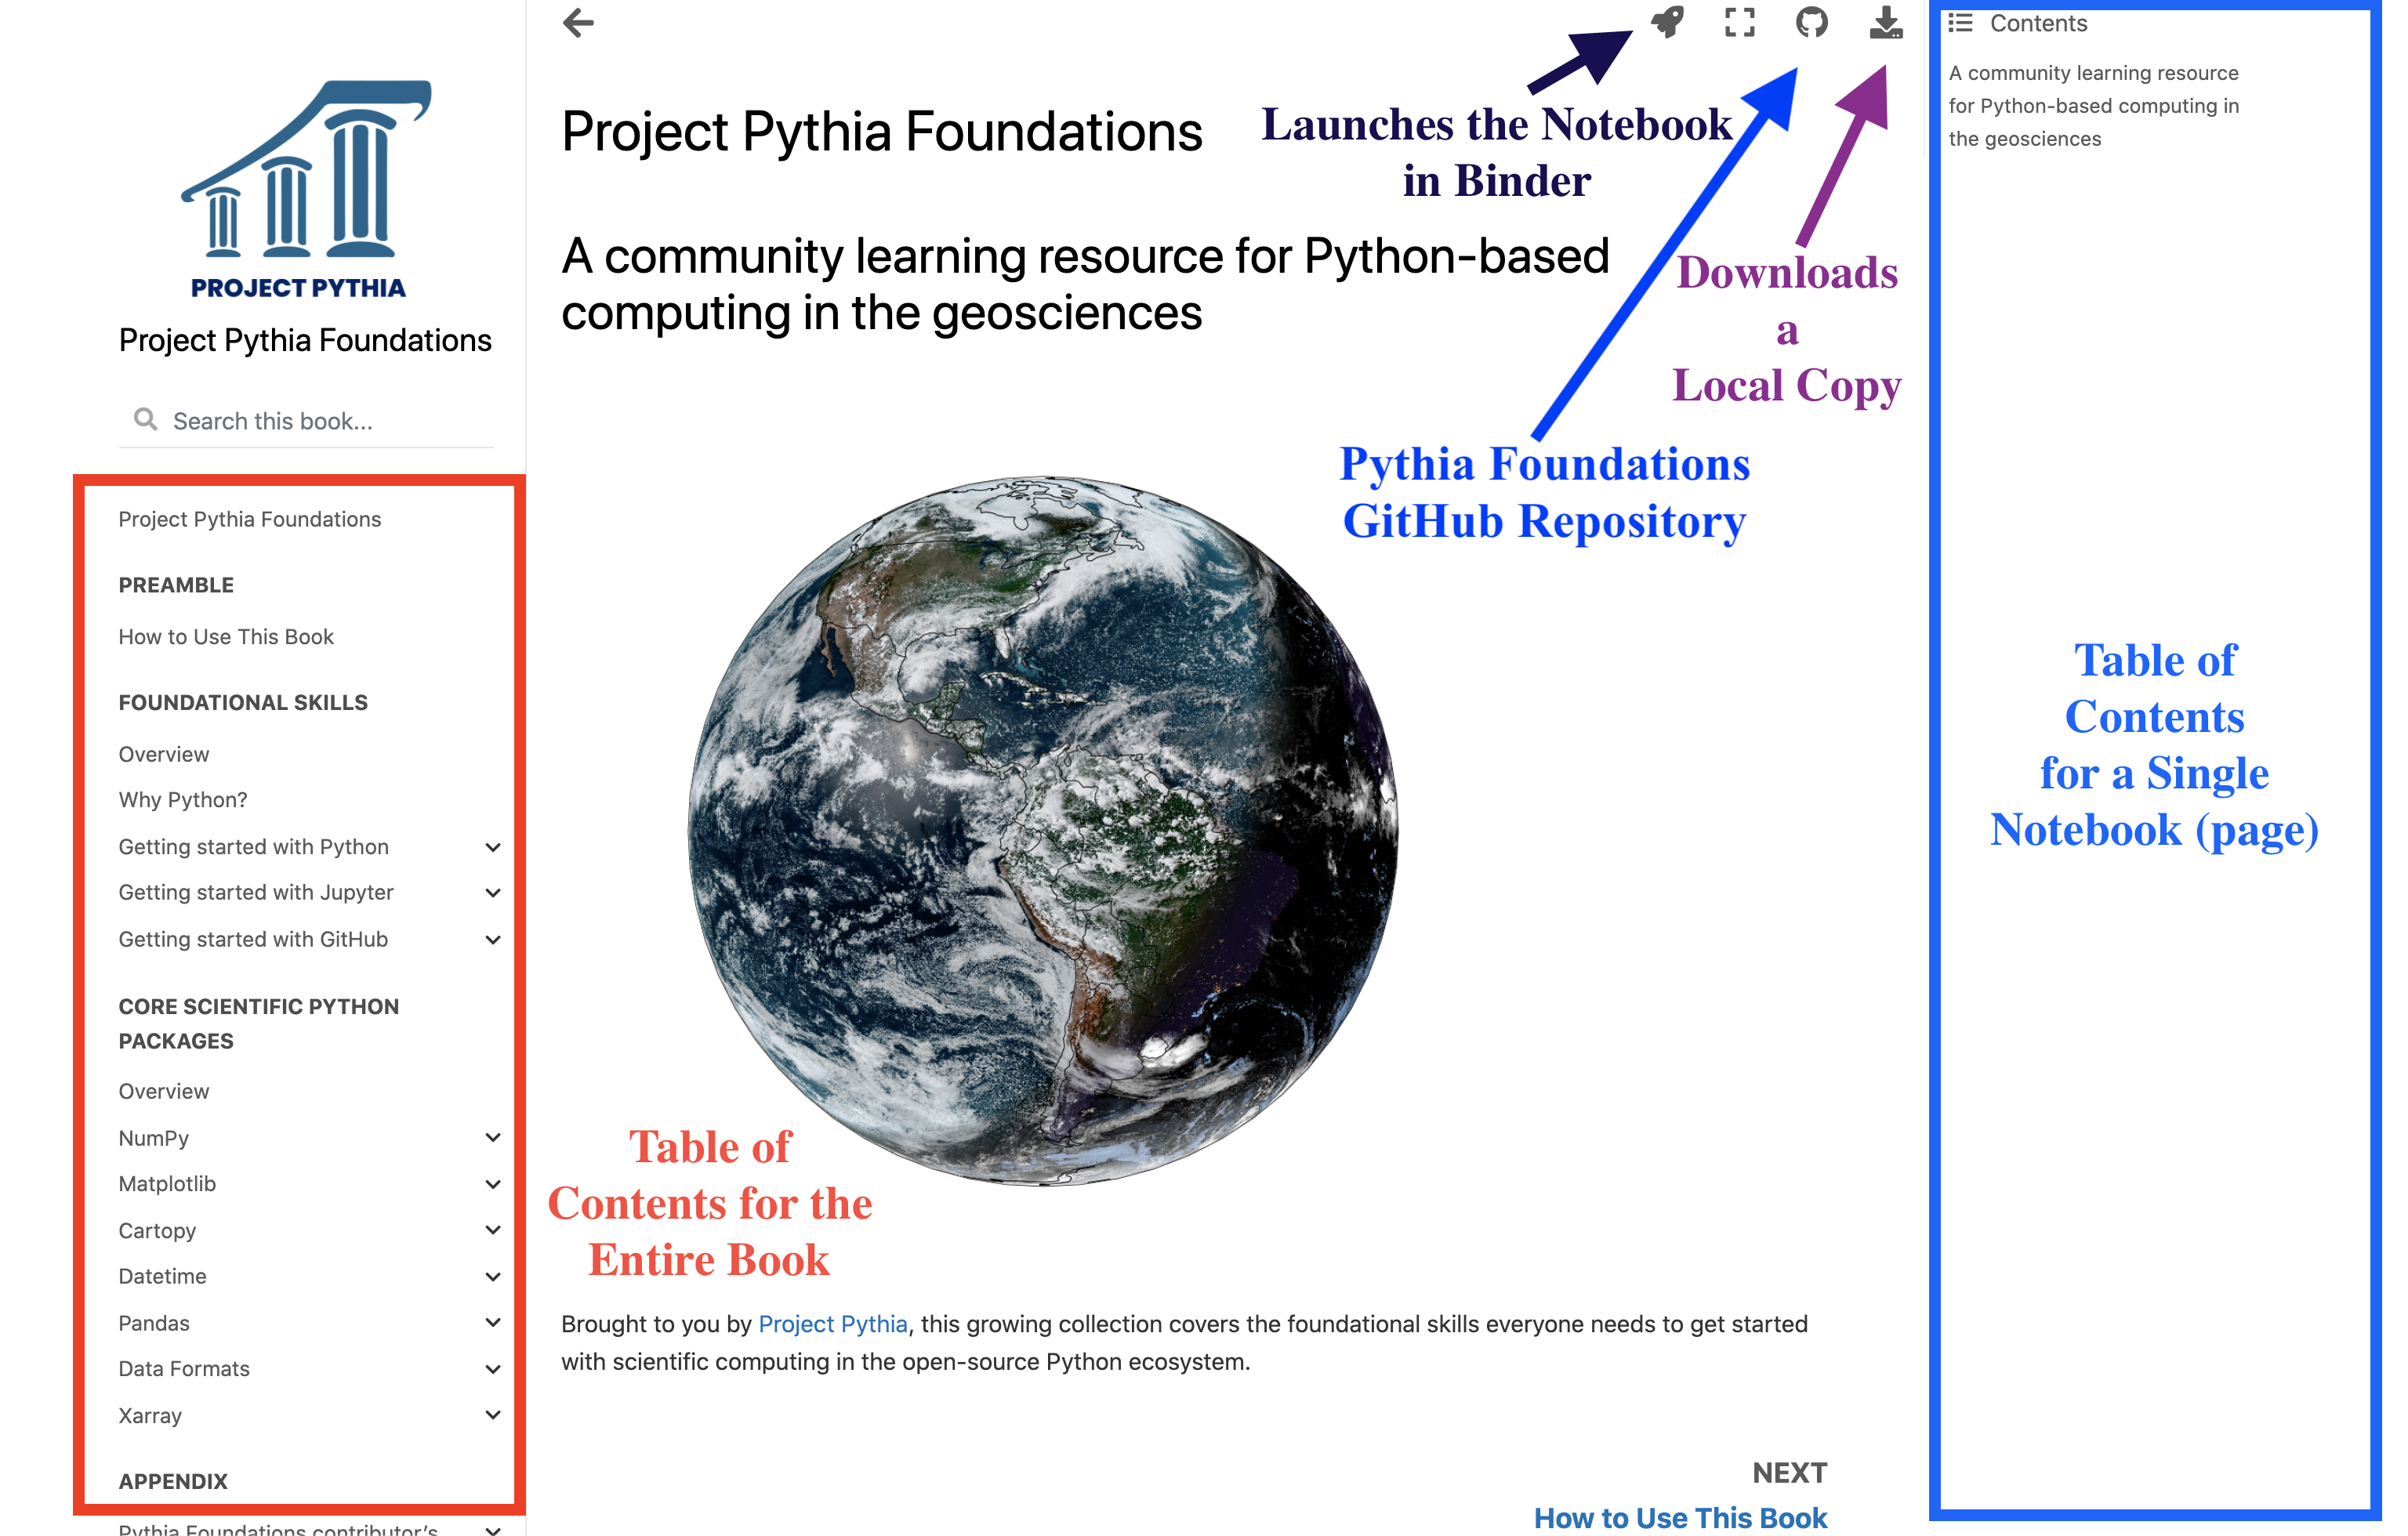 Annotated Pythia Foundations home page